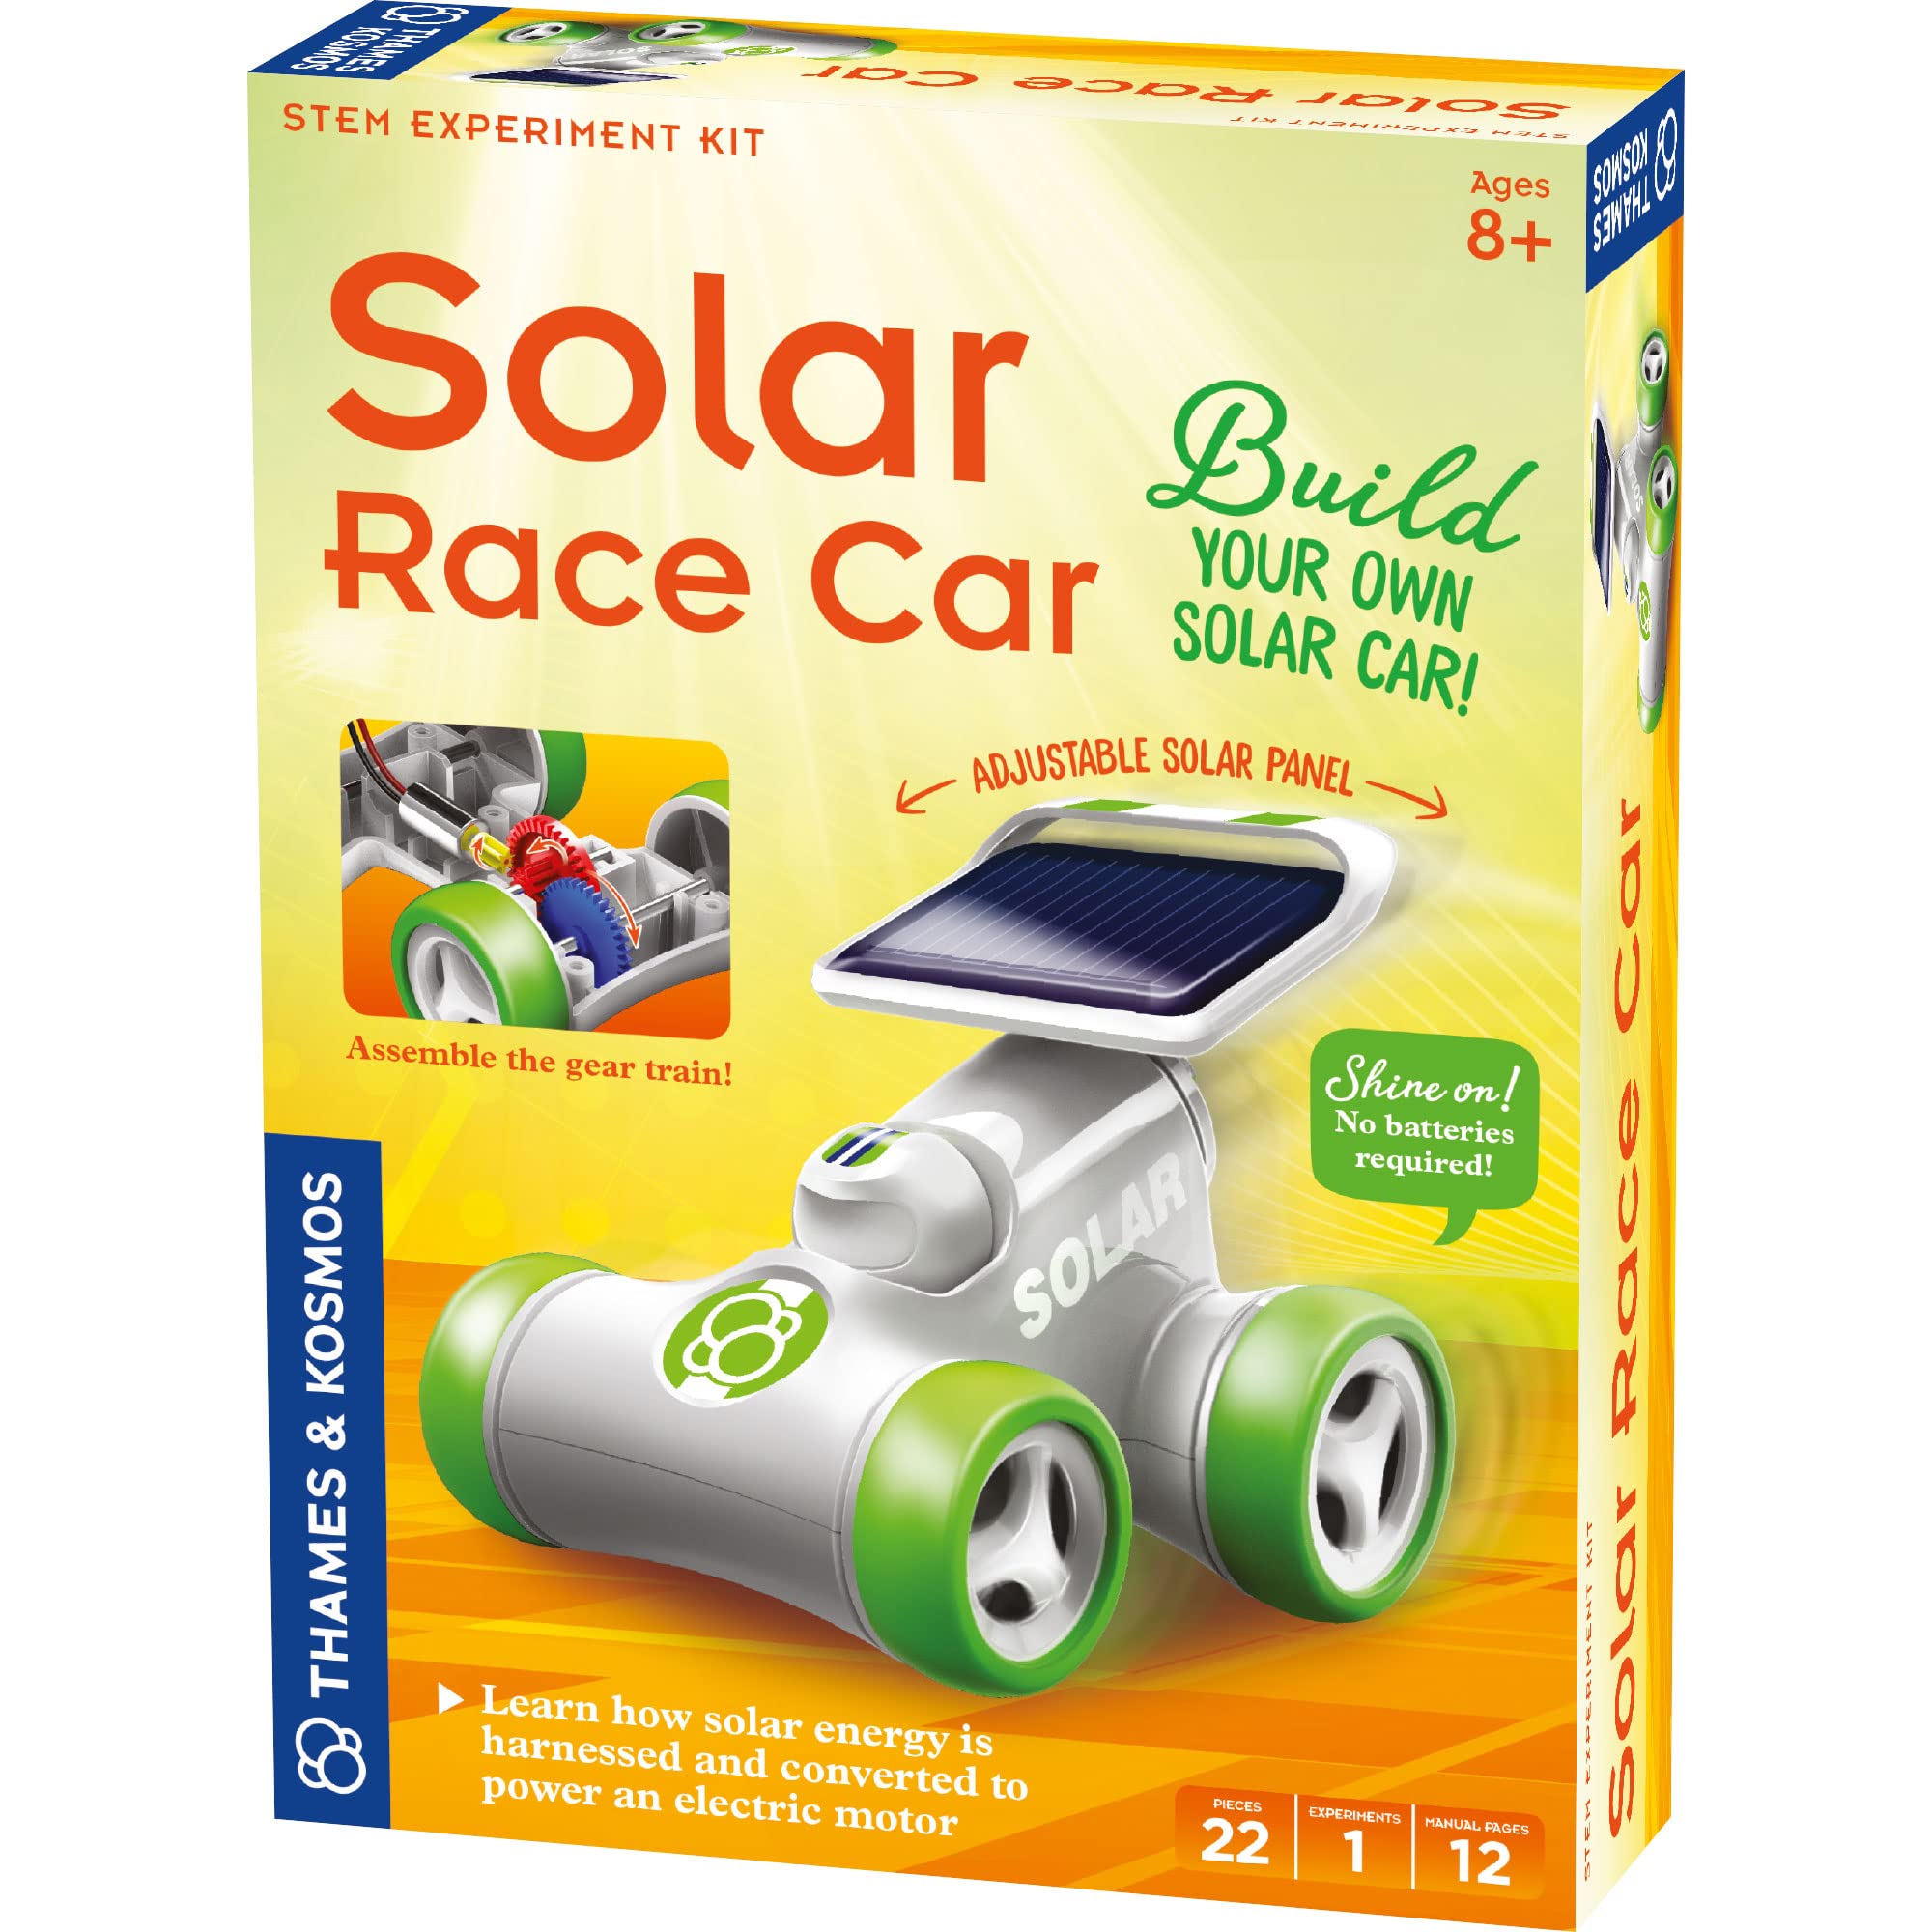 Thames & Kosmos Solar Race Car STEM Experiment Kit | Build a Solar-Powered Race Car | No Batteries Required | Learn About Photovoltaic Technology & Sustainability | Solar Panel Included | for Ages 8+